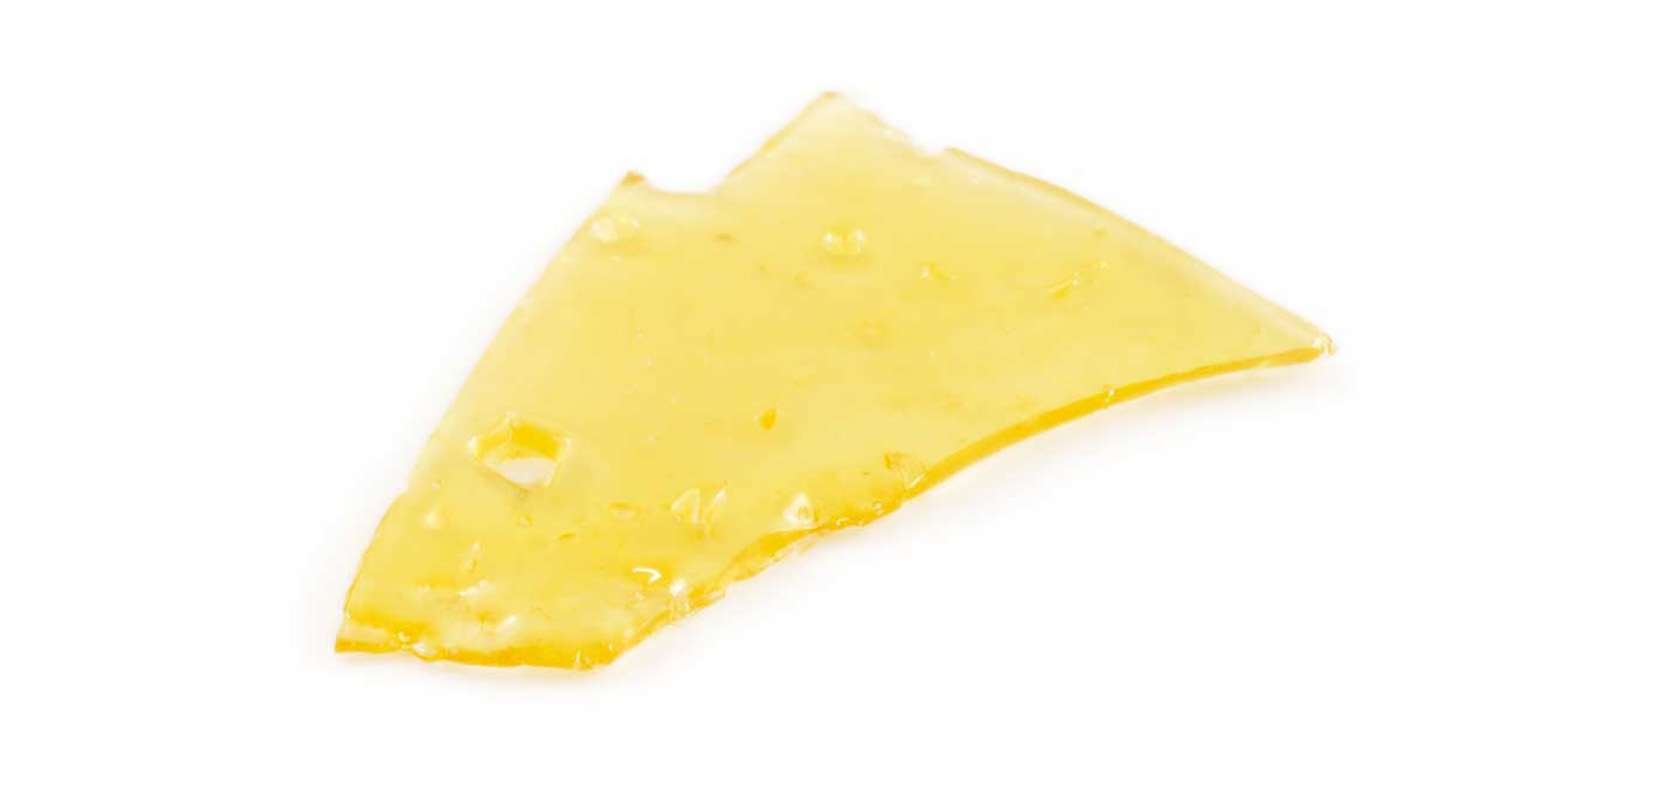 Purple Space Cookies shatter. Cannabis concentrates from Low Price Bud weed dispensary and mail order marijuana weed store.